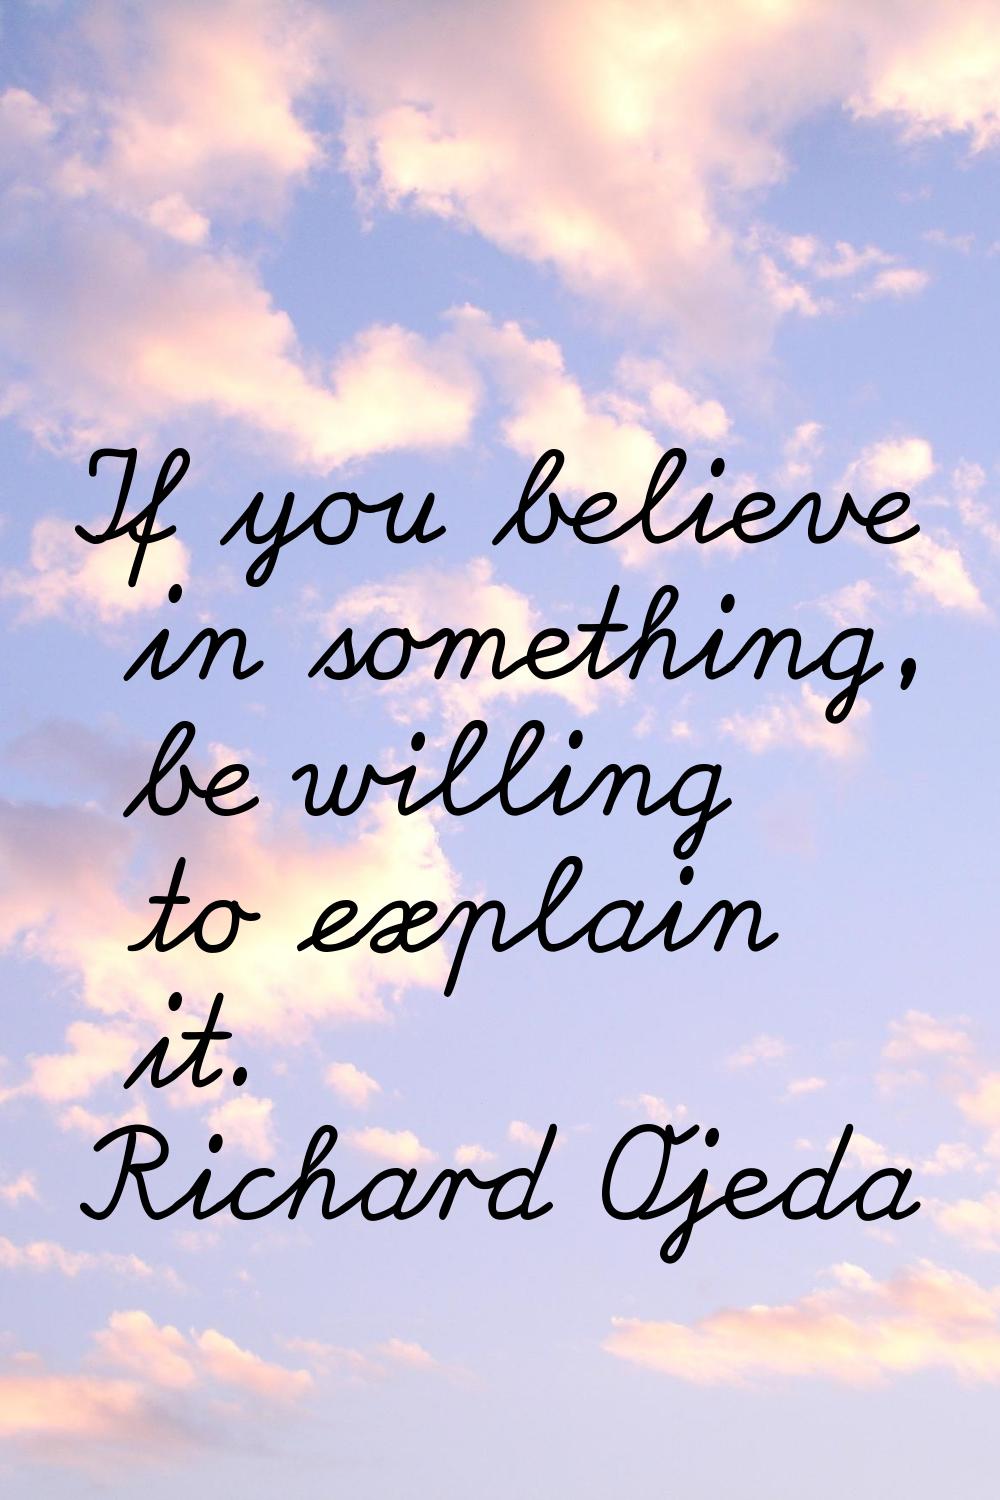 If you believe in something, be willing to explain it.